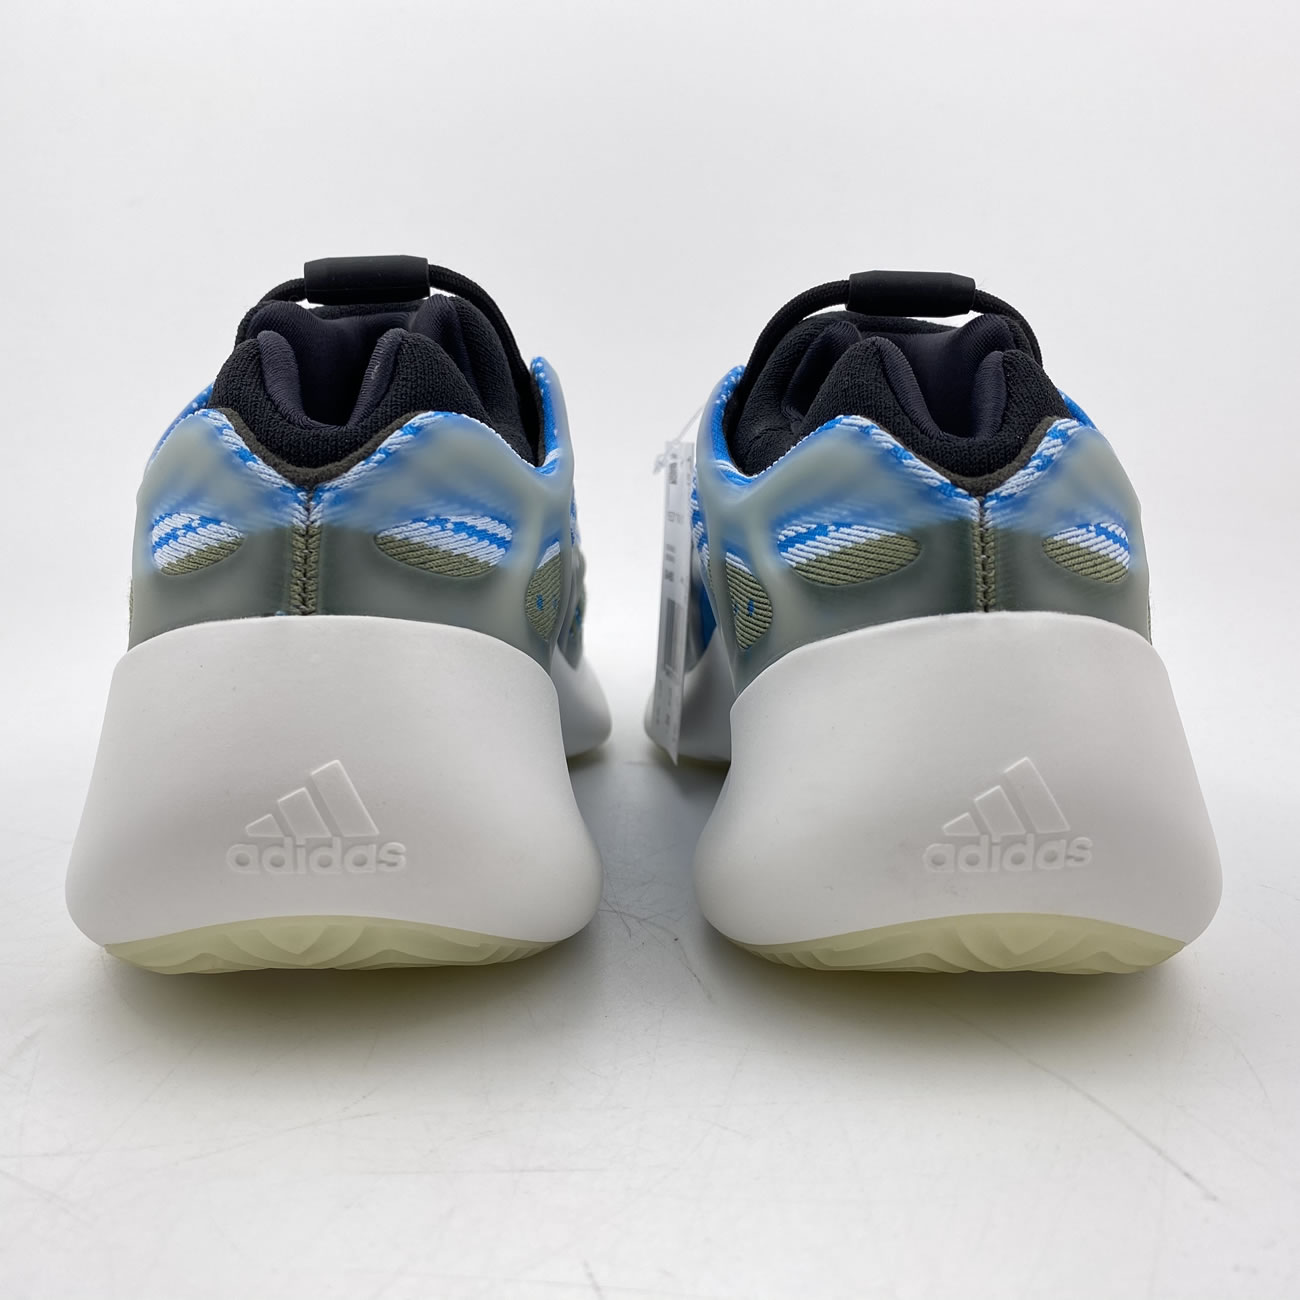 Adidas Yeezy 700 V3 Arazre G54850 New Release Date For Sale (5) - newkick.org